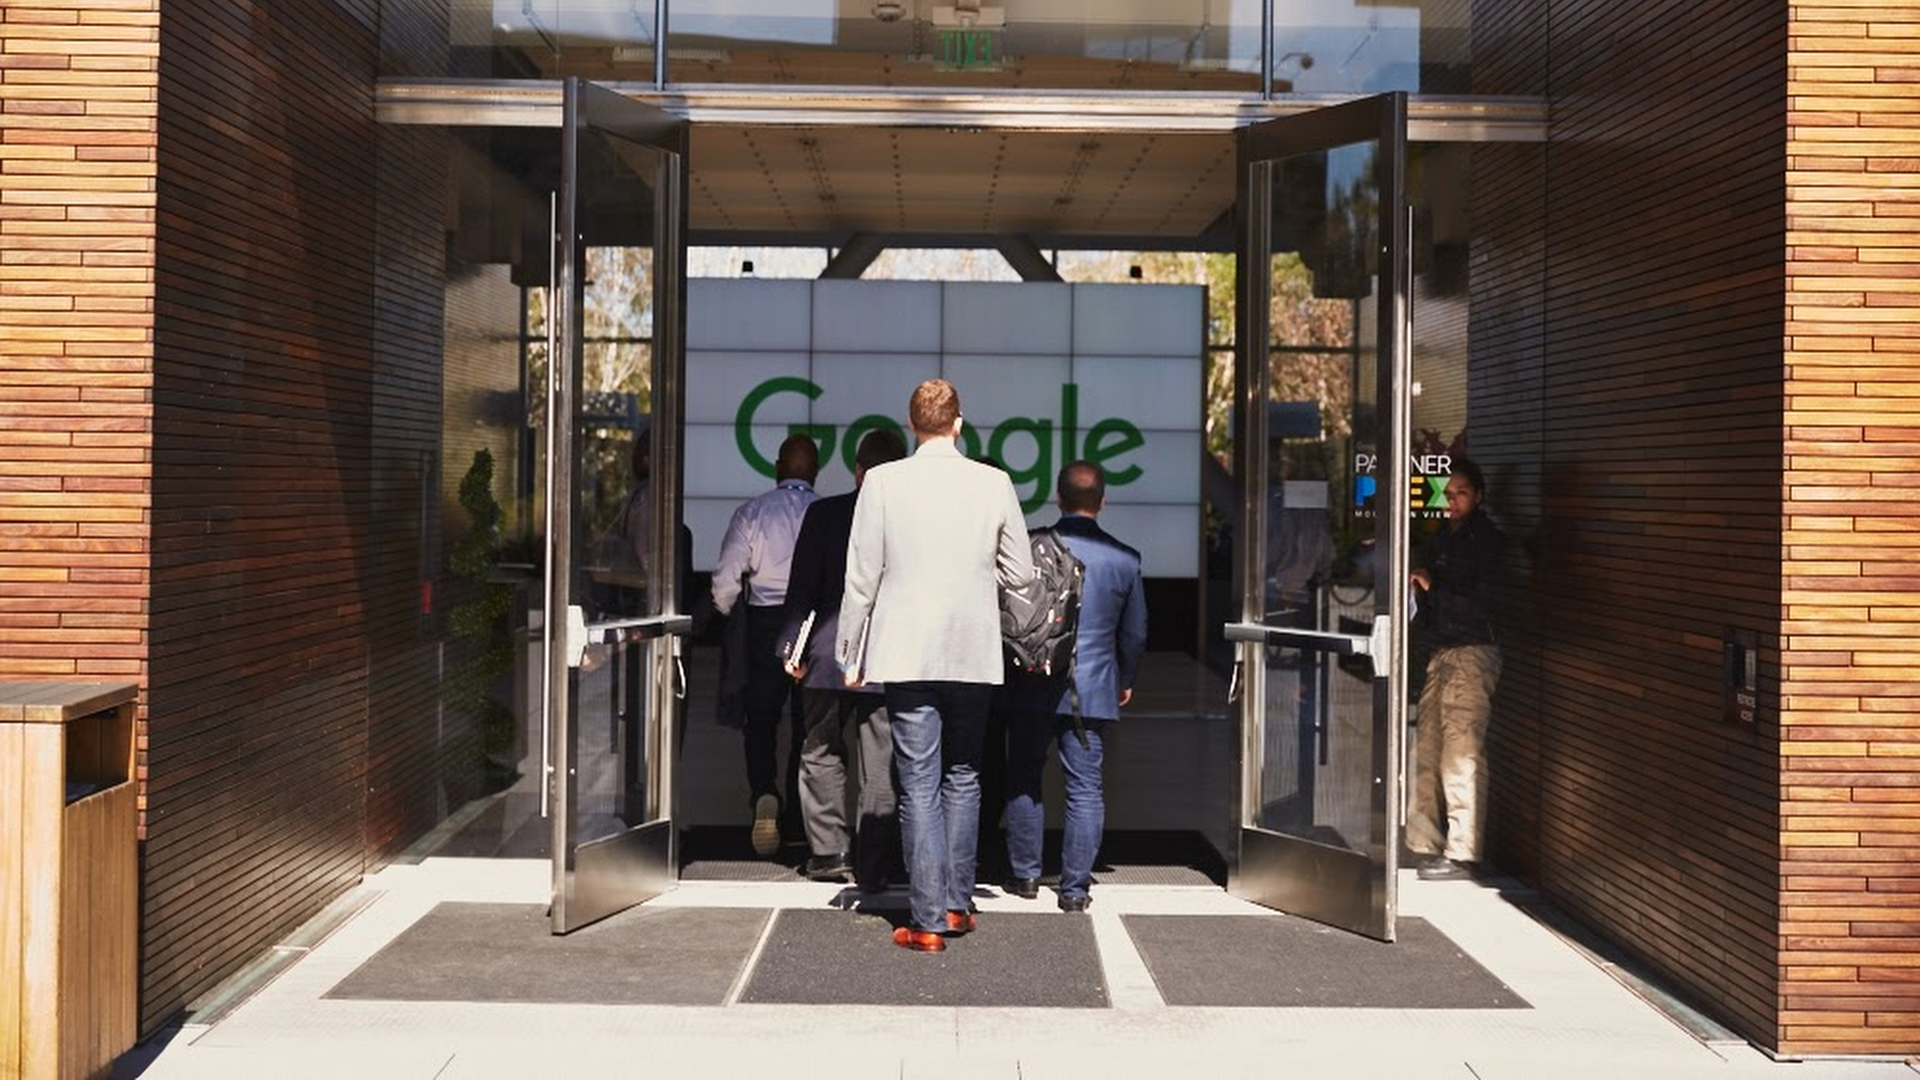 Entrance to a Google office